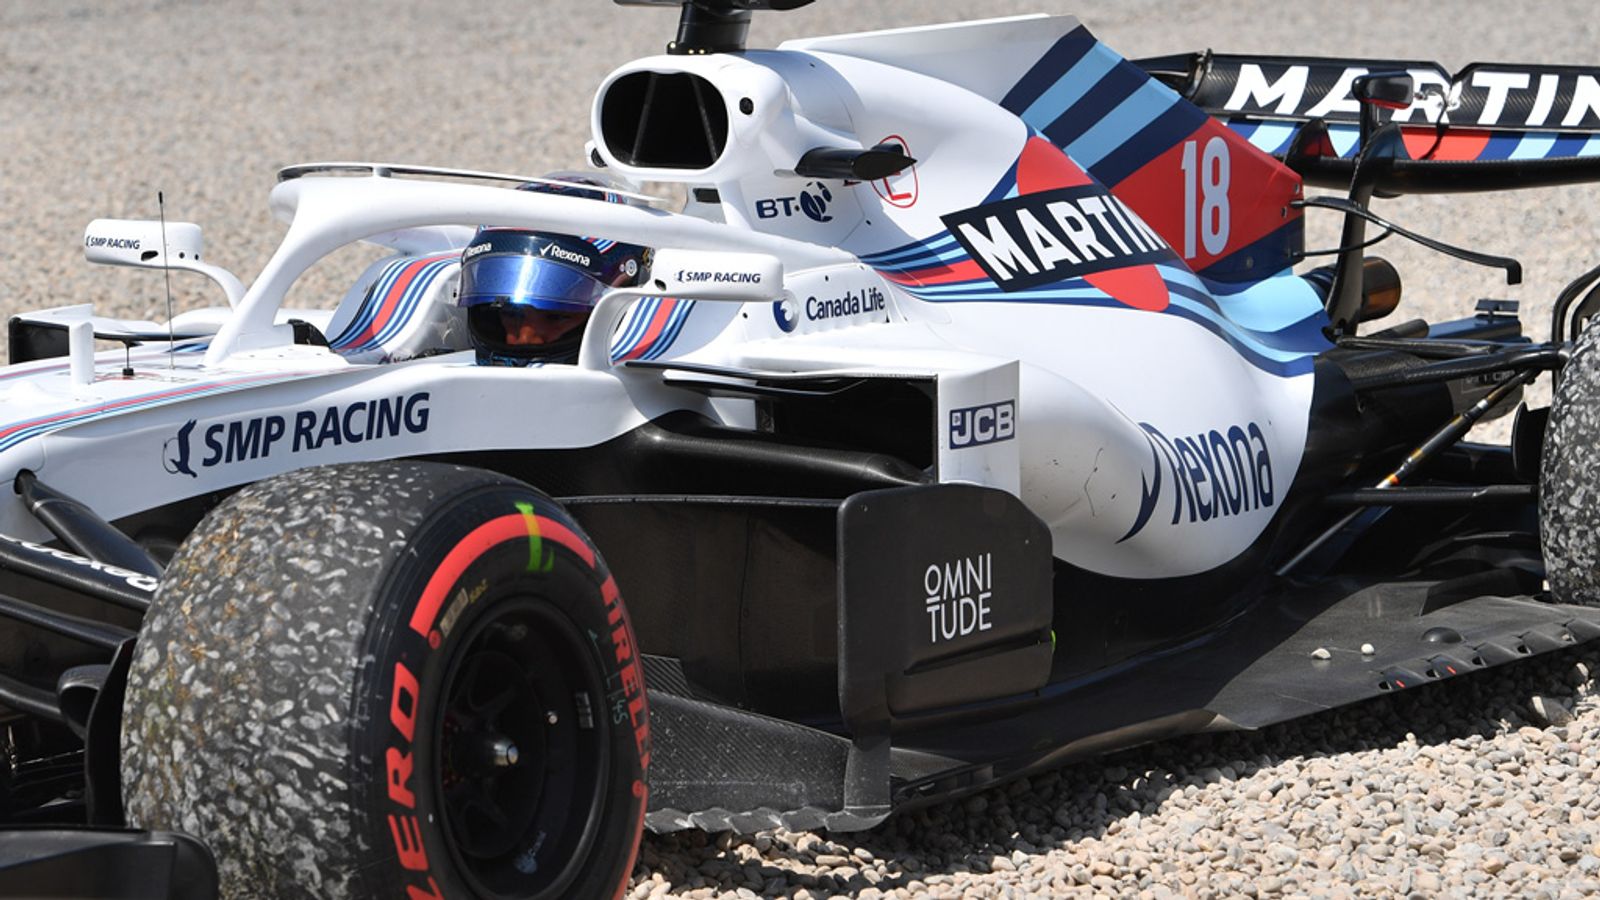 What's wrong with the Williams car? | F1 News